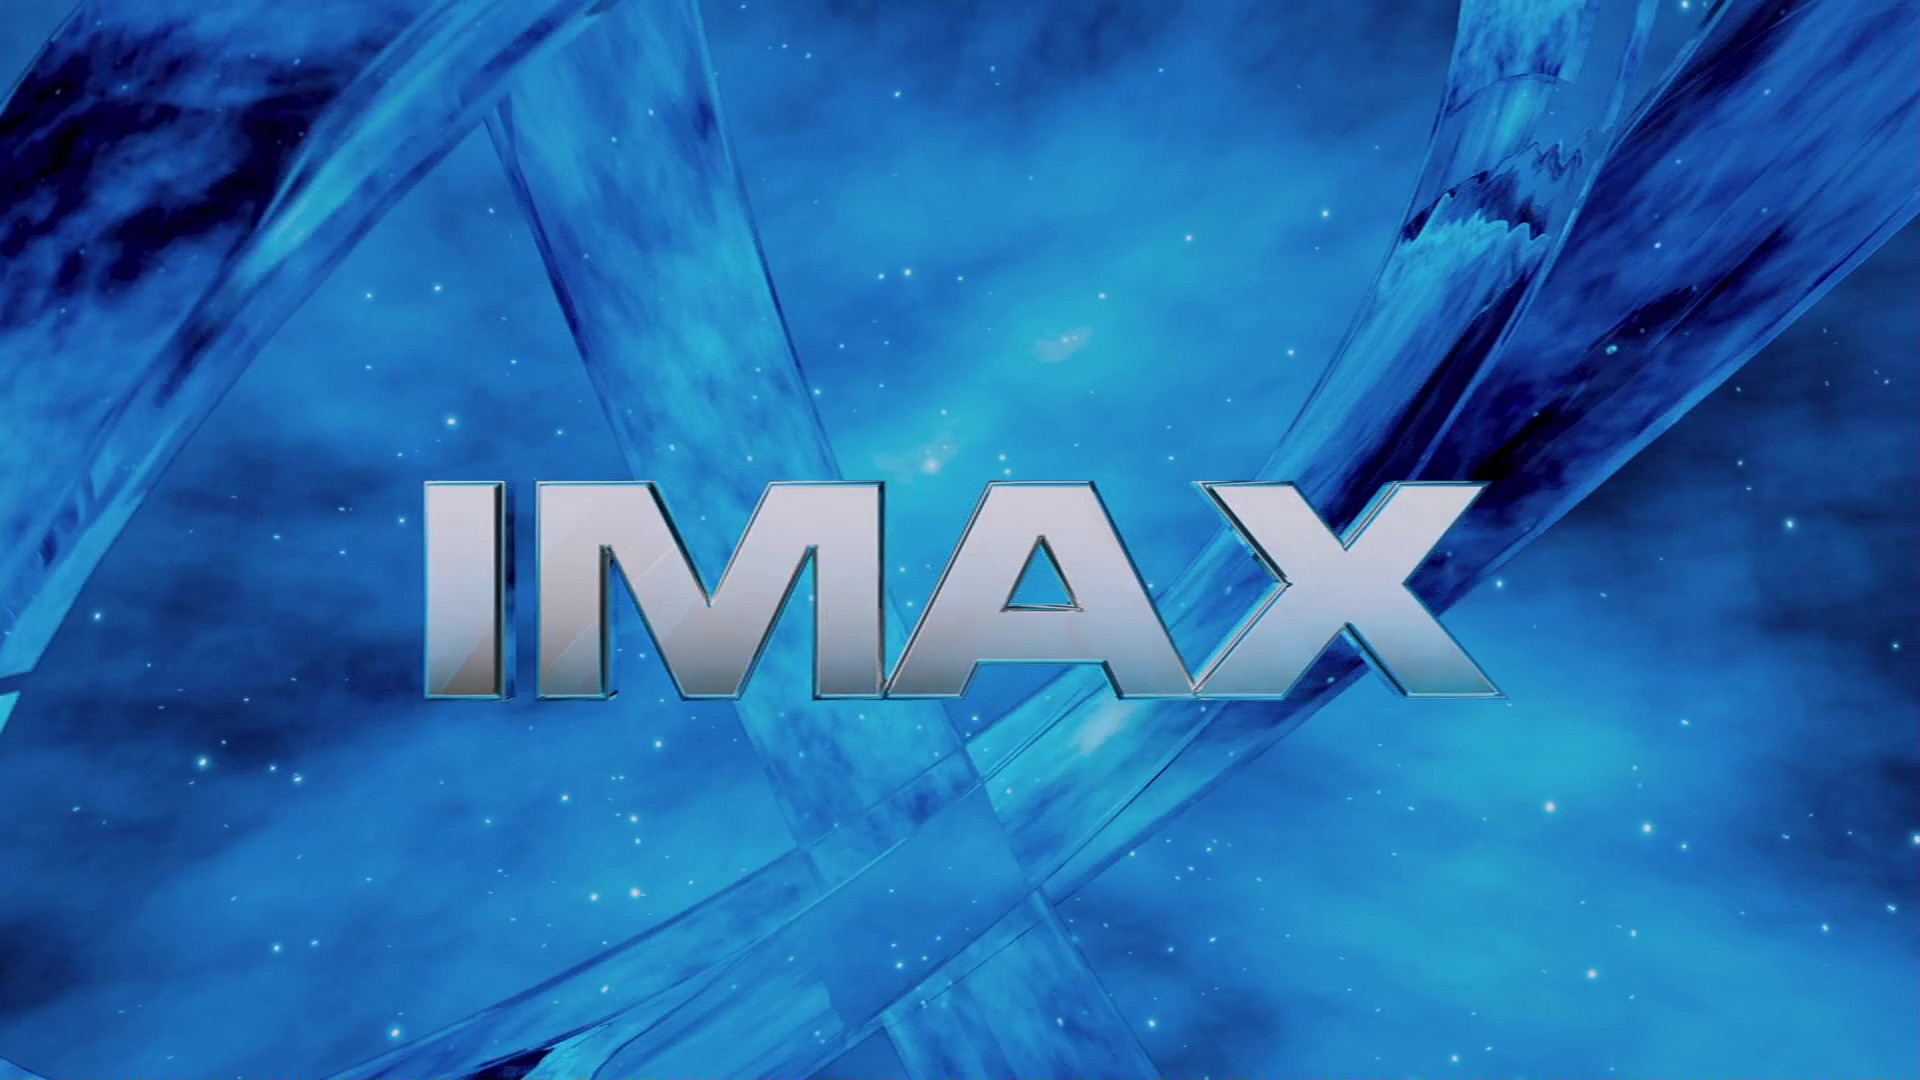 Countdown to IMAX